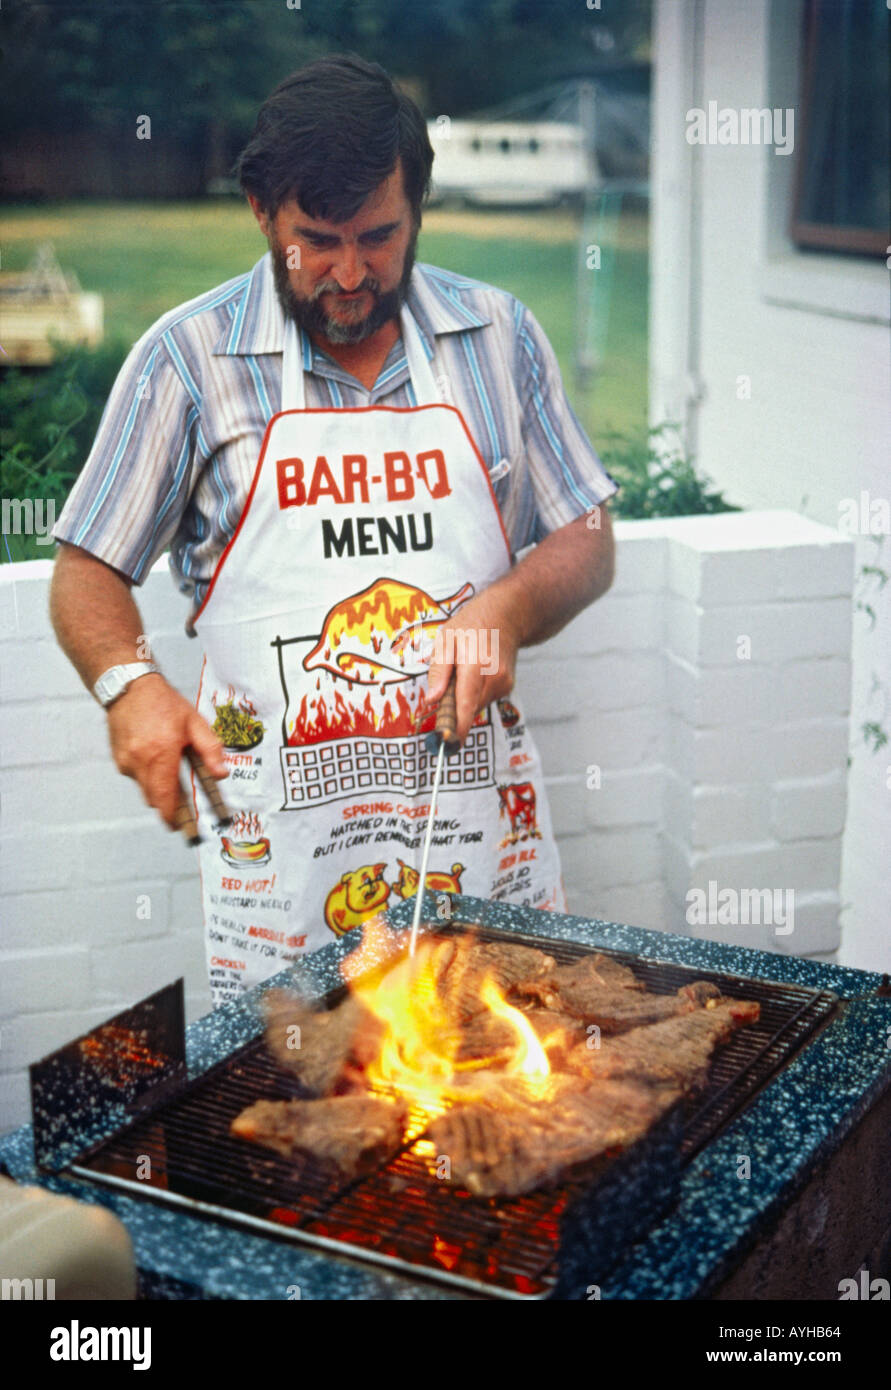 Bearded man in short sleeved shirt and amusing BBQ apron cooks steaks on flaming Bar-B-que grill in suburban garden Australia Stock Photo